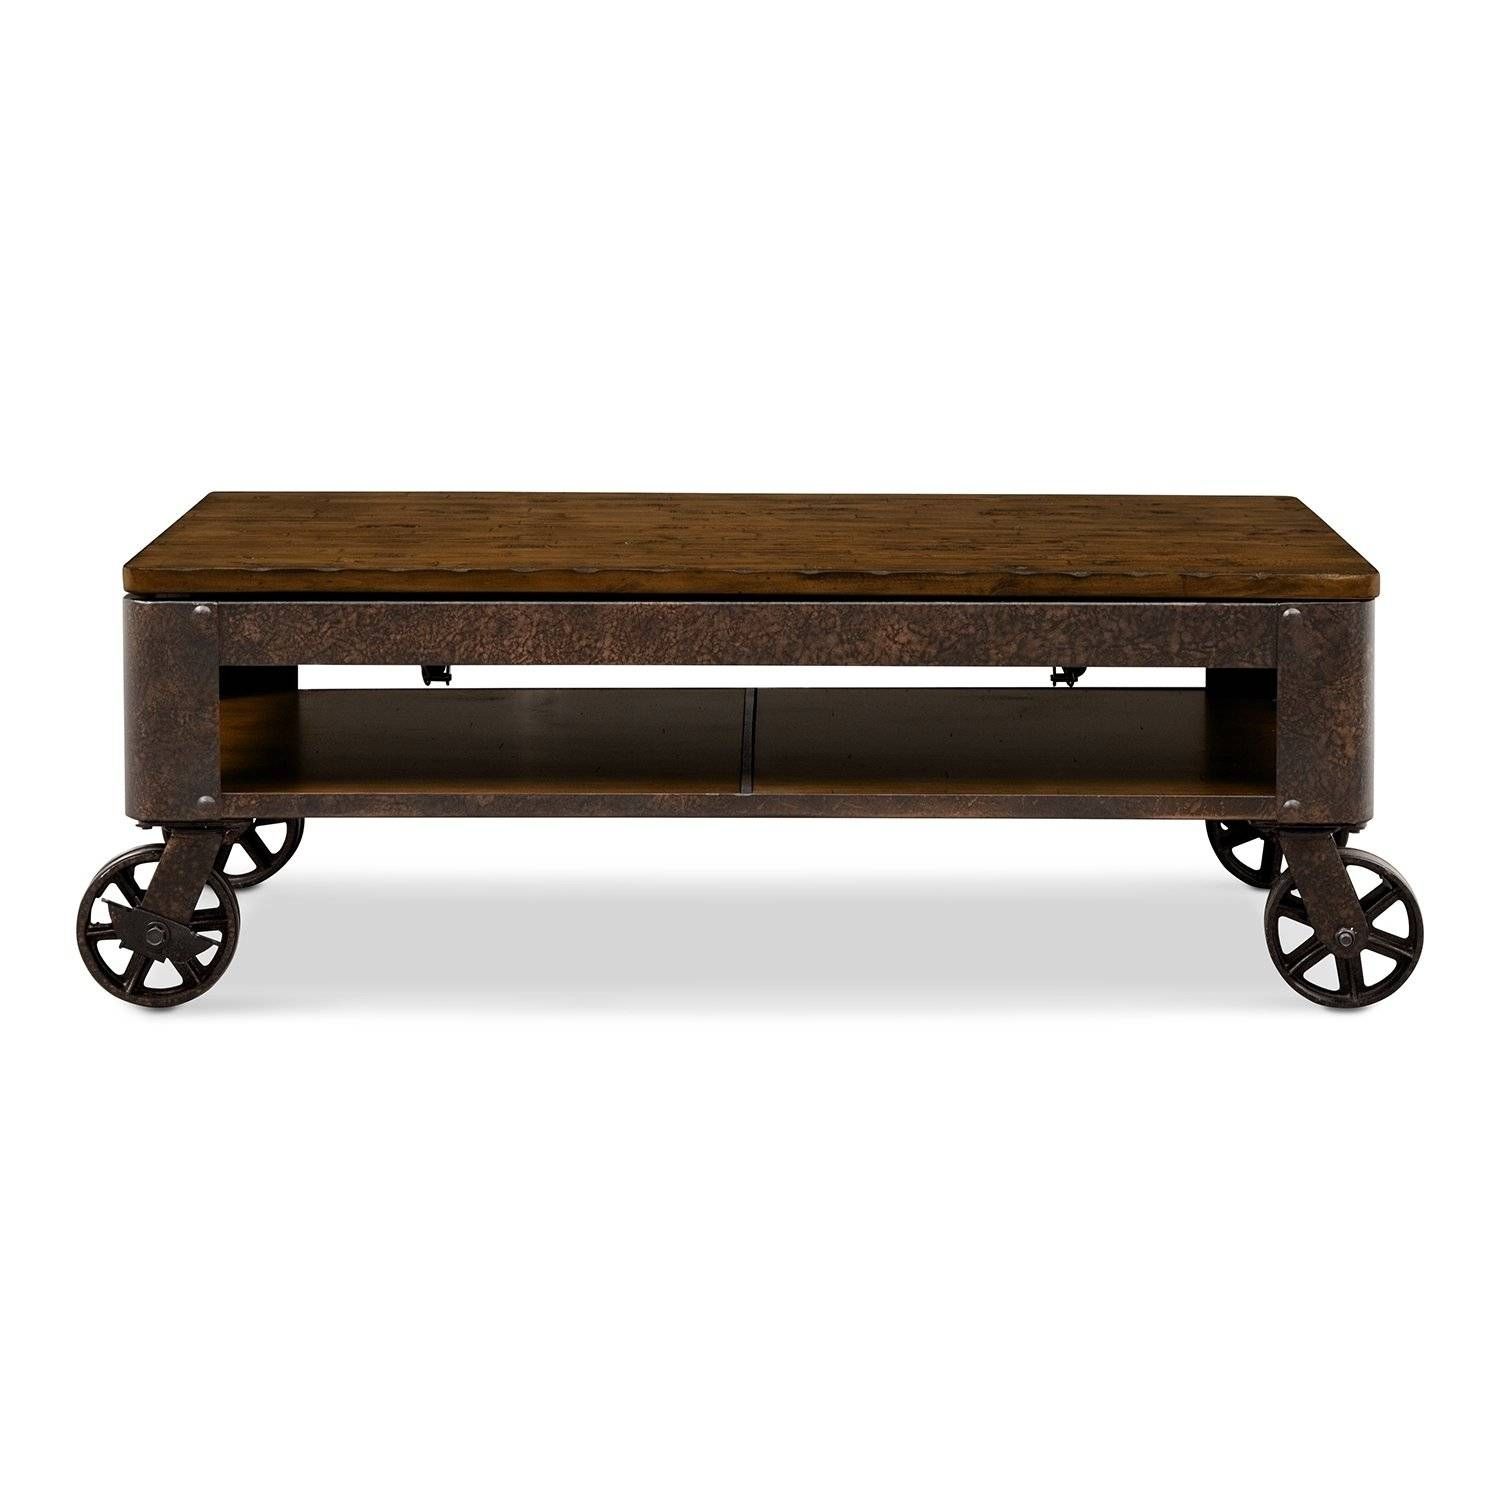 Coffee Table: Simple Rustic Coffee Table With Wheels Ideas Car With Regard To Glass Coffee Tables With Casters (View 17 of 30)